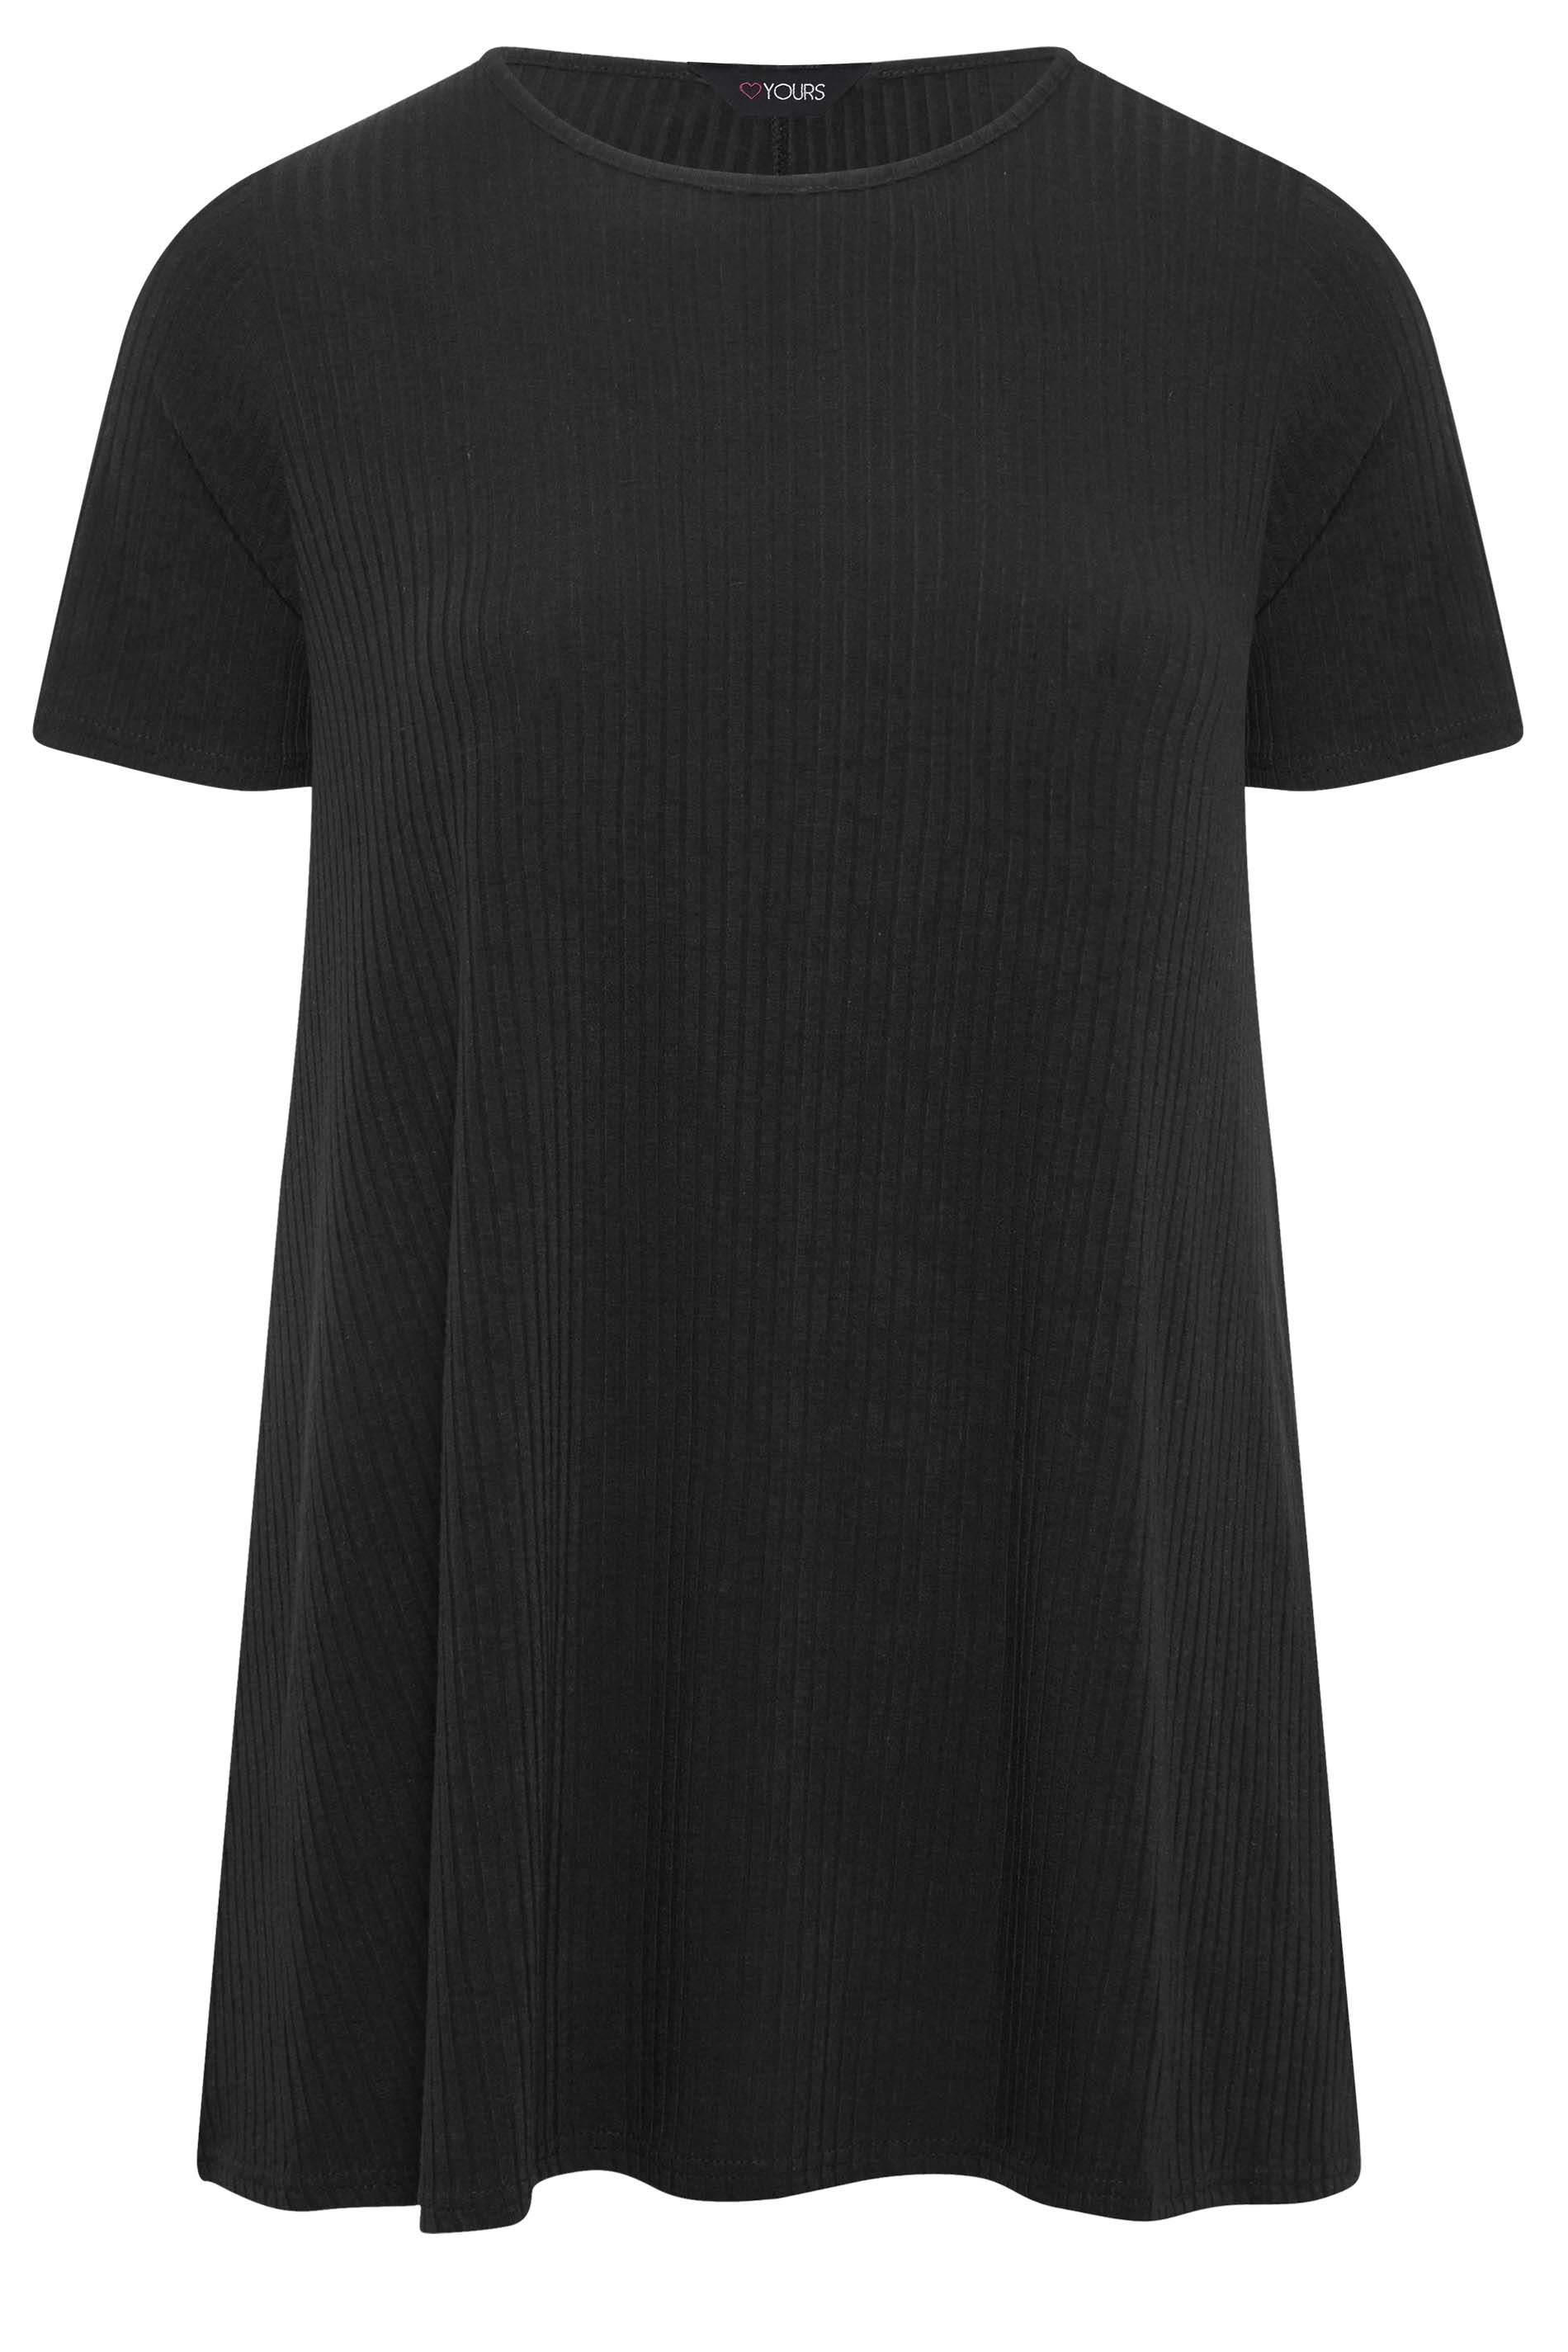 Plus Size Black Ribbed Swing Top | Yours Clothing